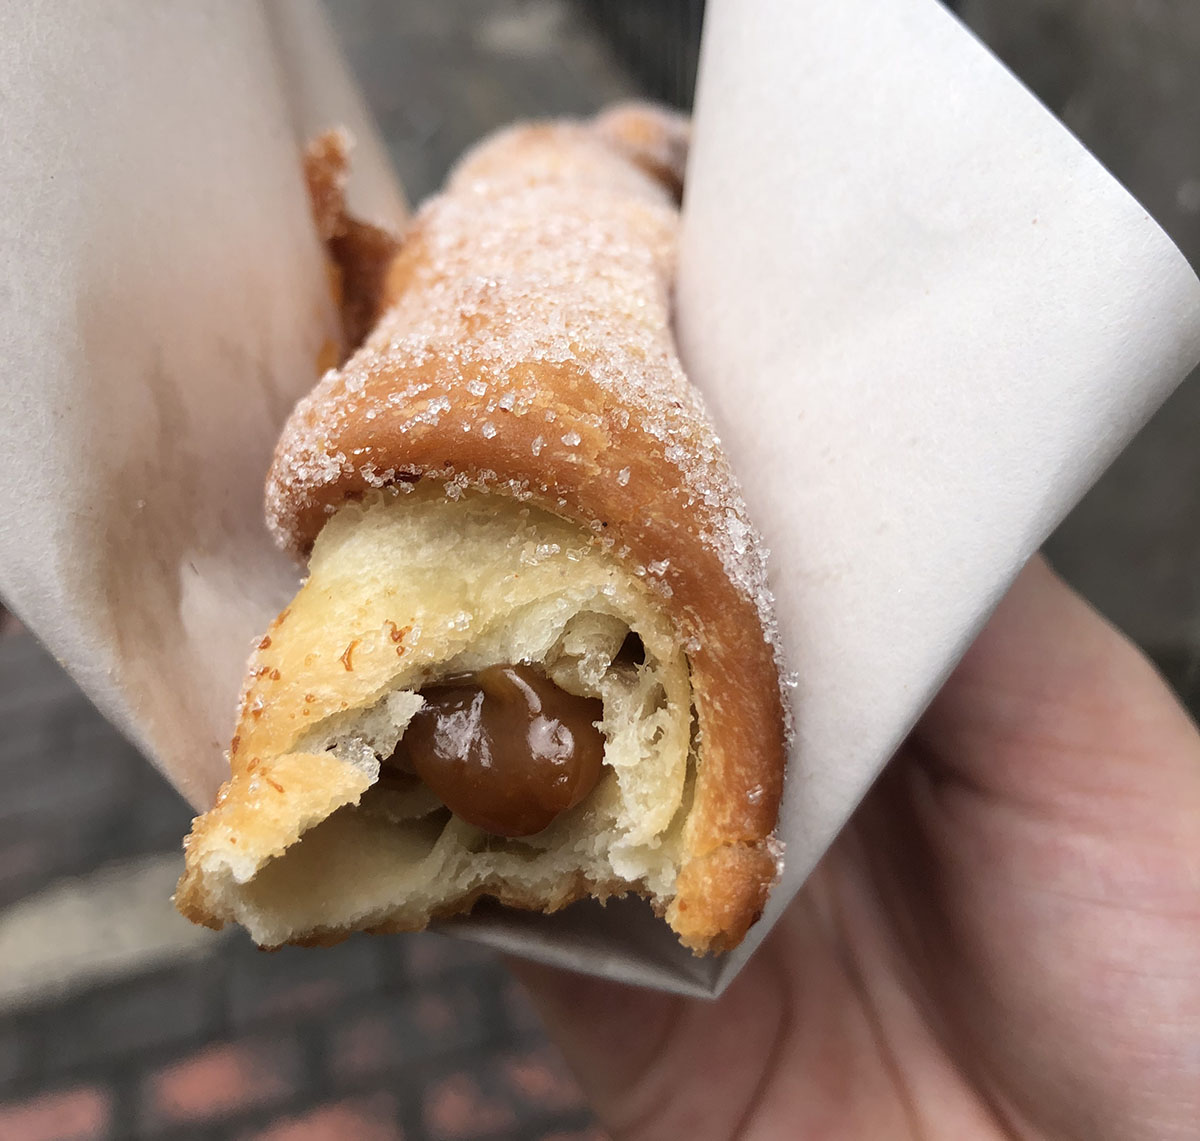 Gooey caramel coming out of a deep fried doughy churro covered in sugar